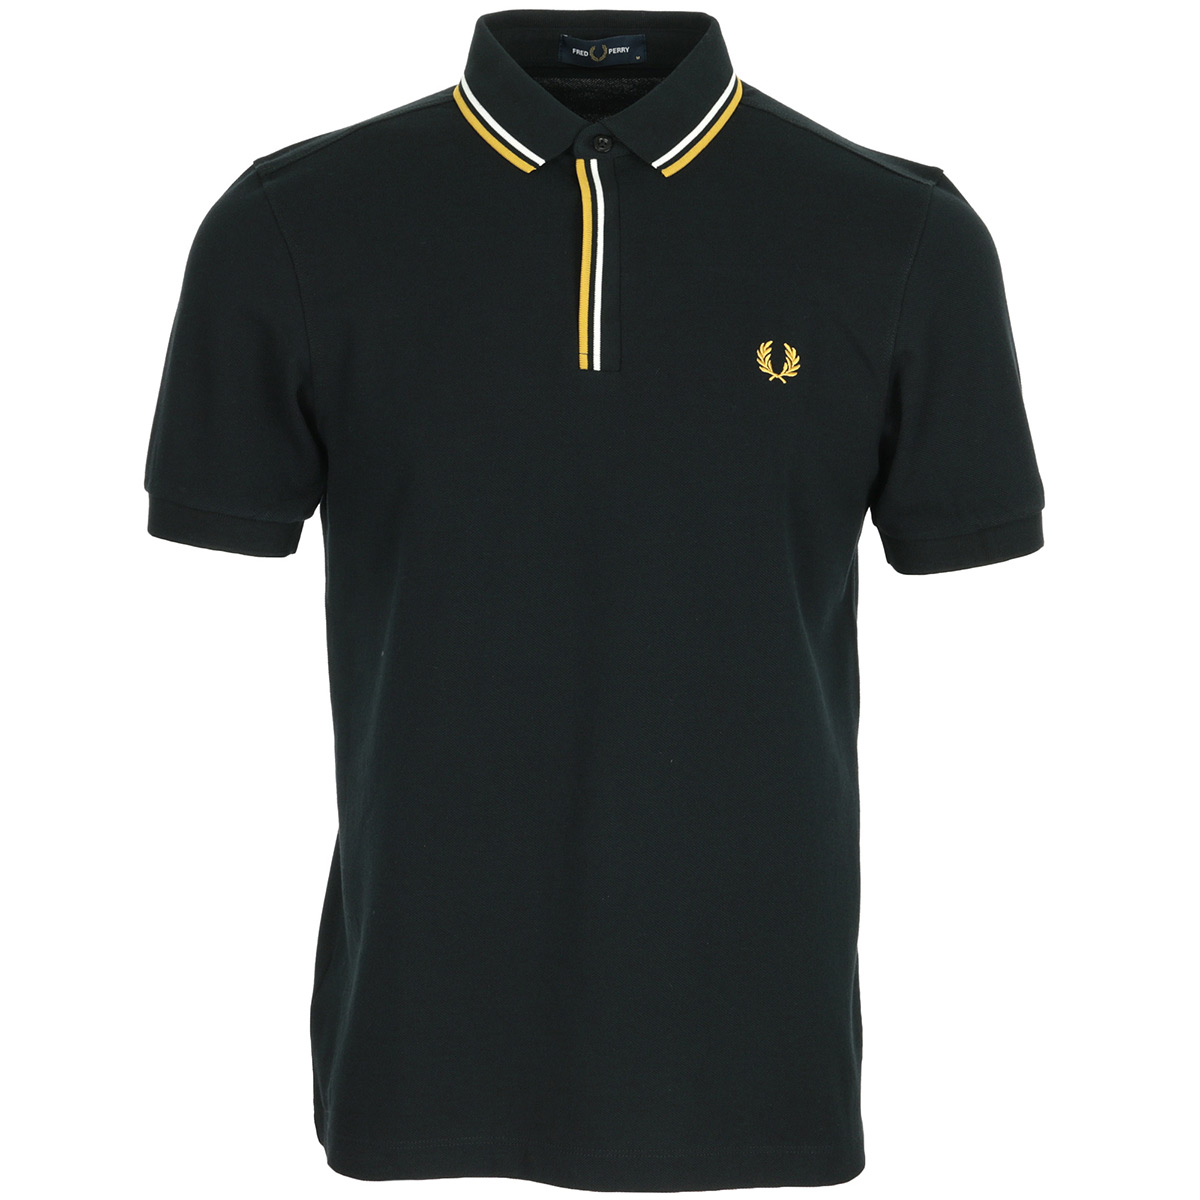 Fred Perry Tipped Placket Polo Shirt